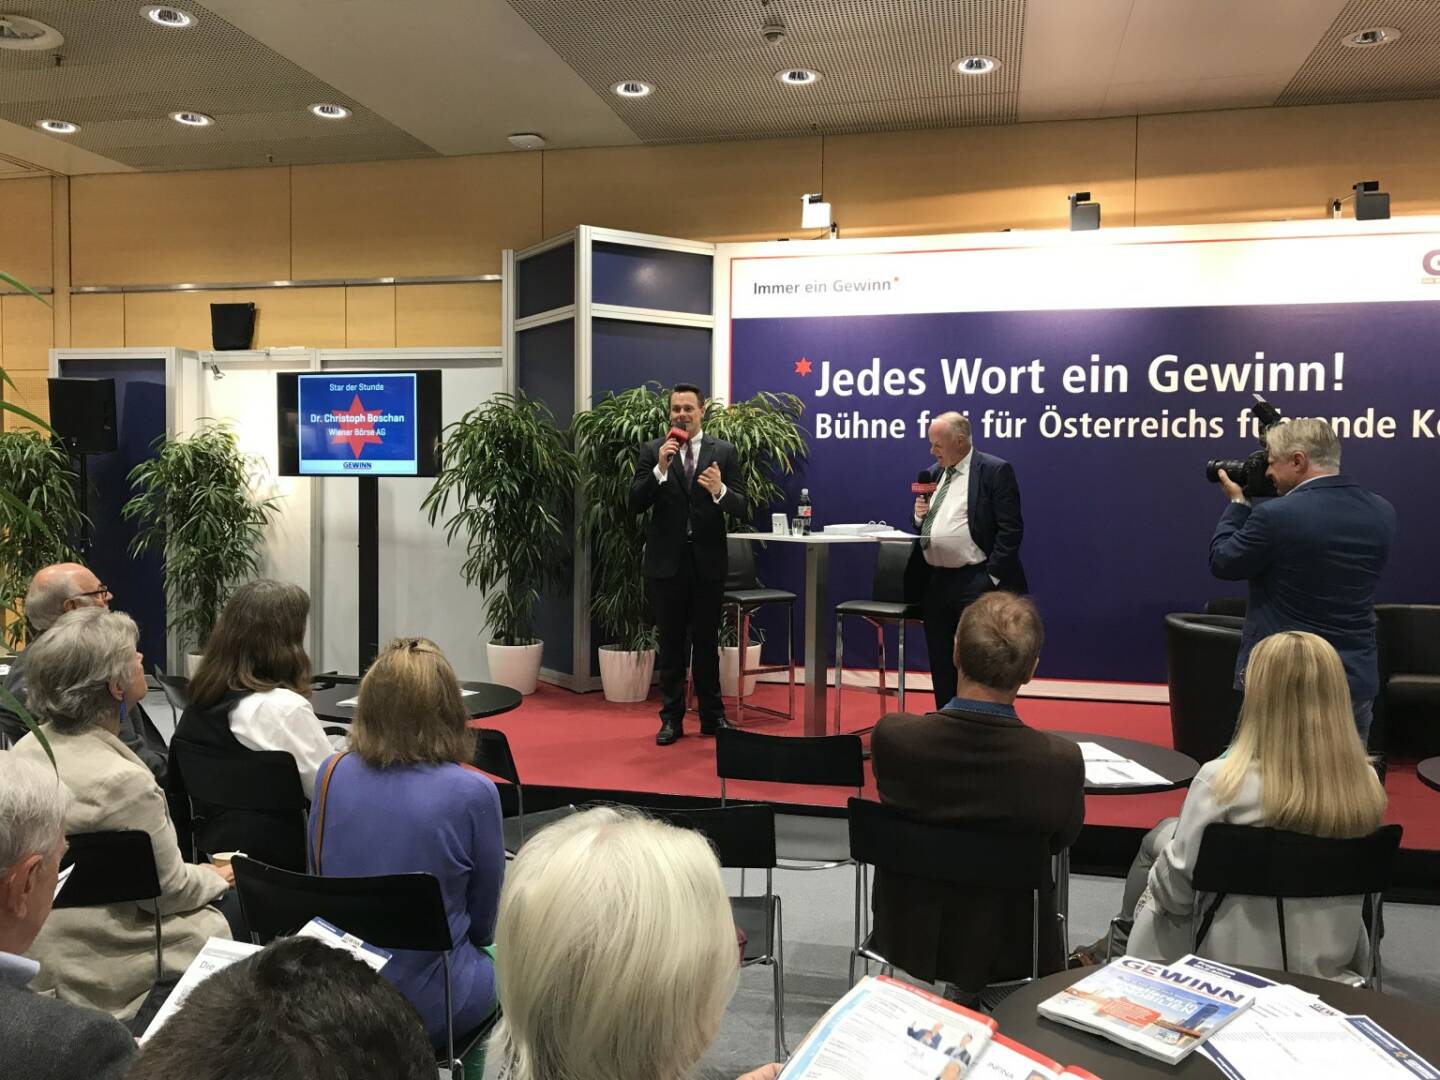 Opening guest at GEWINN-Messe today, Austrias largest retail investor event. Reviewing my first year at Wiener Börse AG which was very eventful: Strong market development & turnover,  one of the biggest Austrian IPOs approaching and global market segment established.